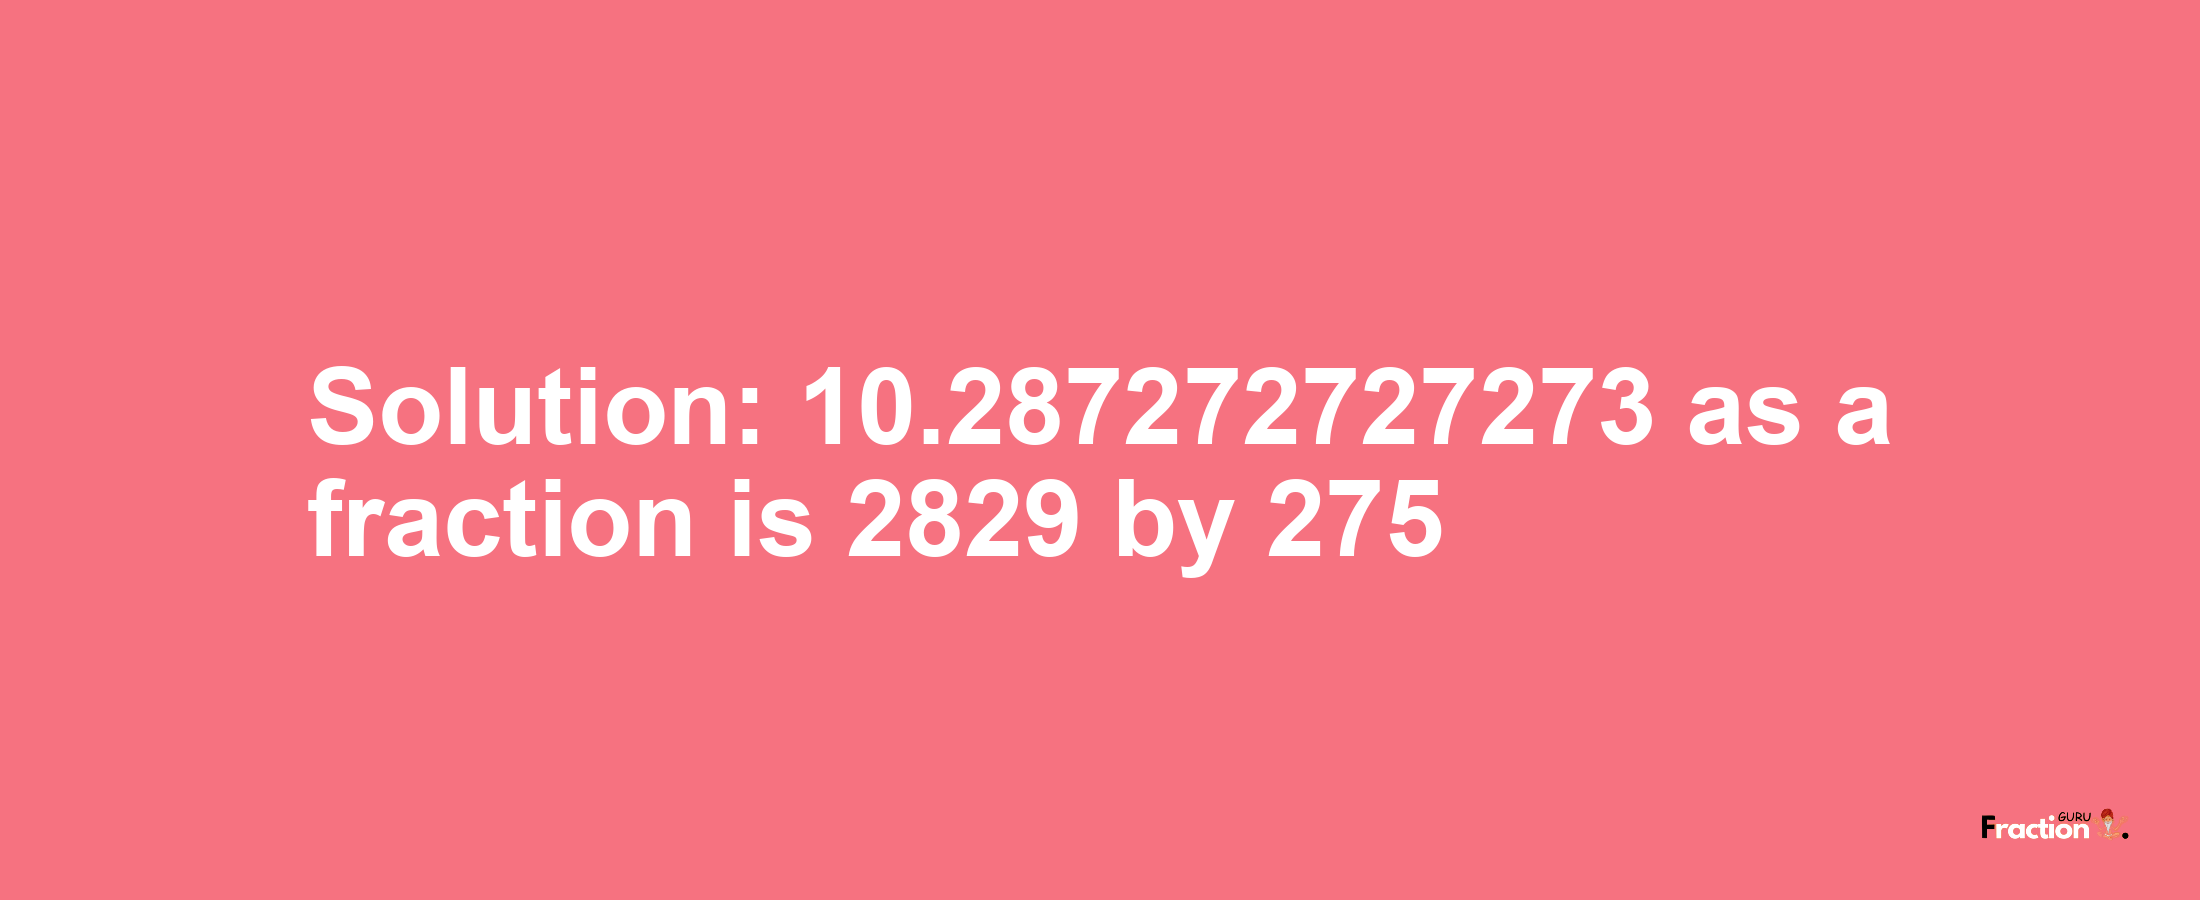 Solution:10.287272727273 as a fraction is 2829/275